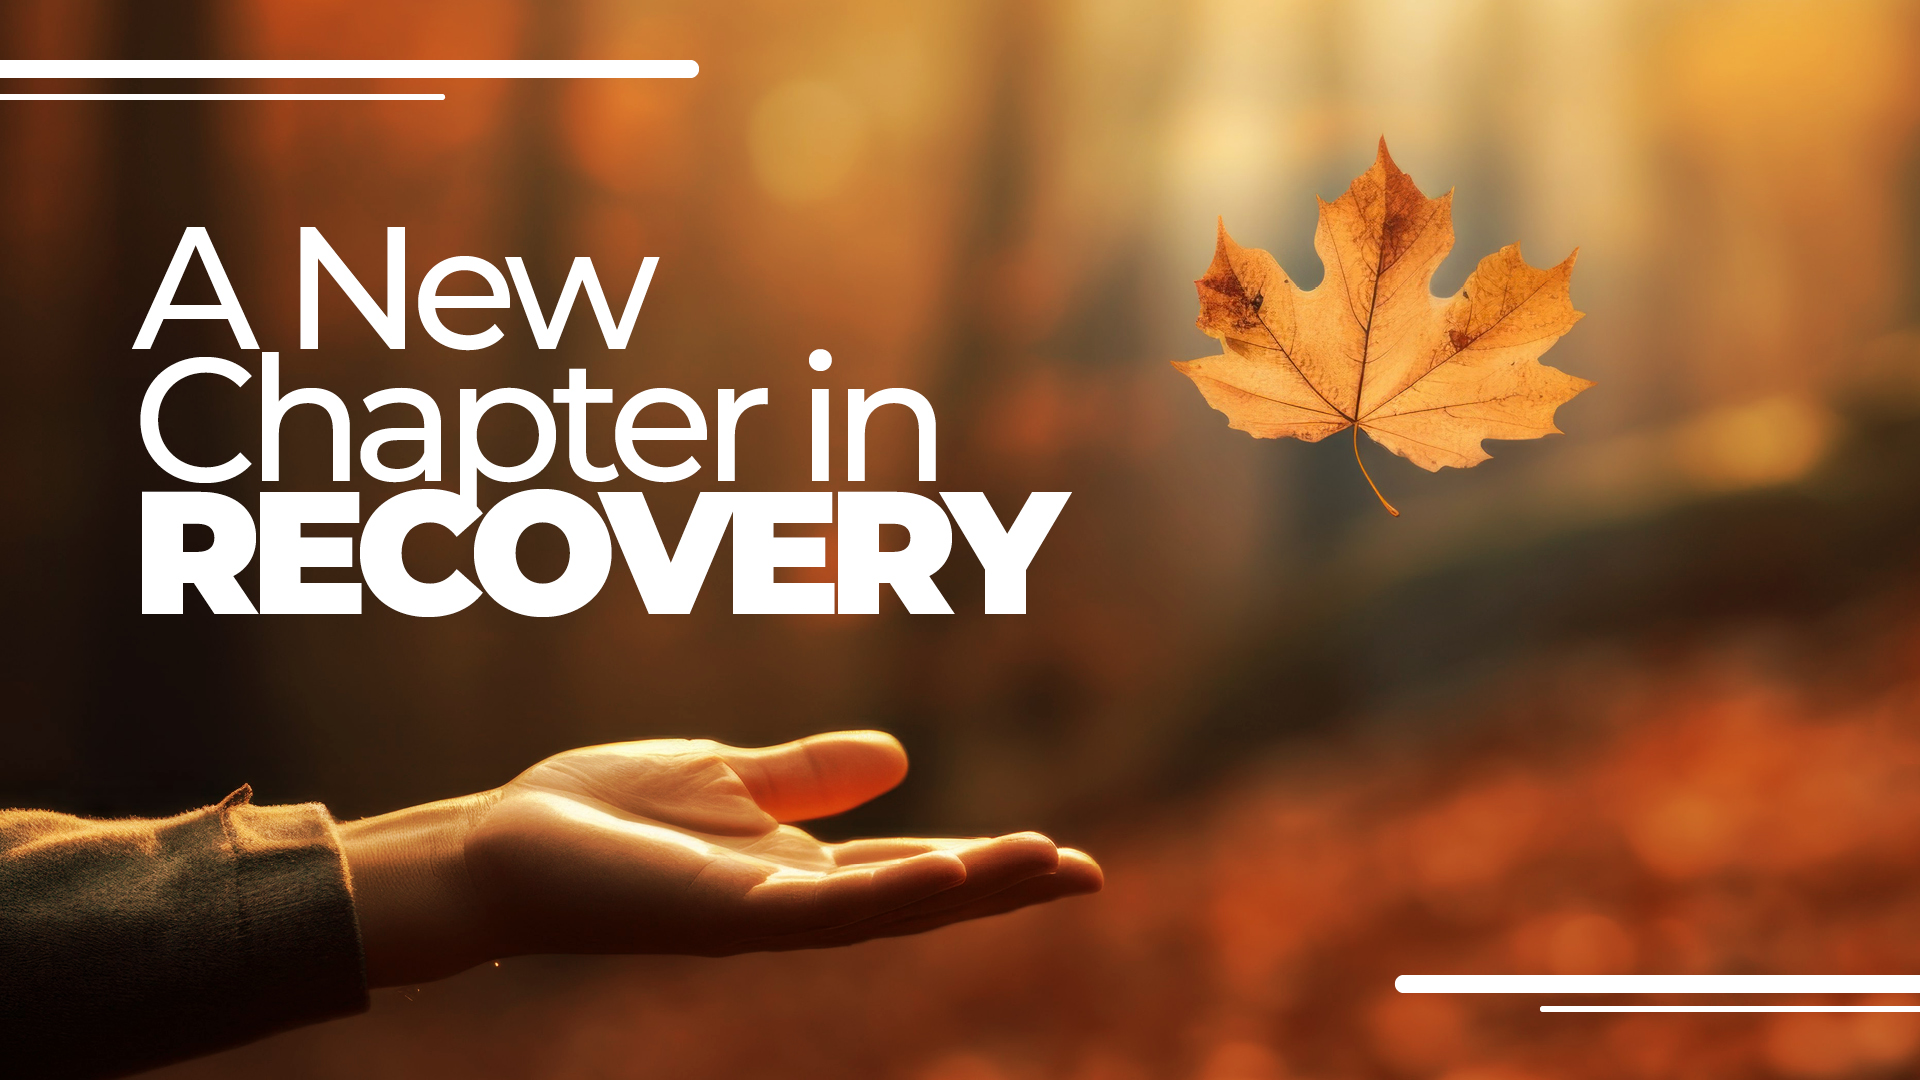 How fall represents a new chapter in recovery